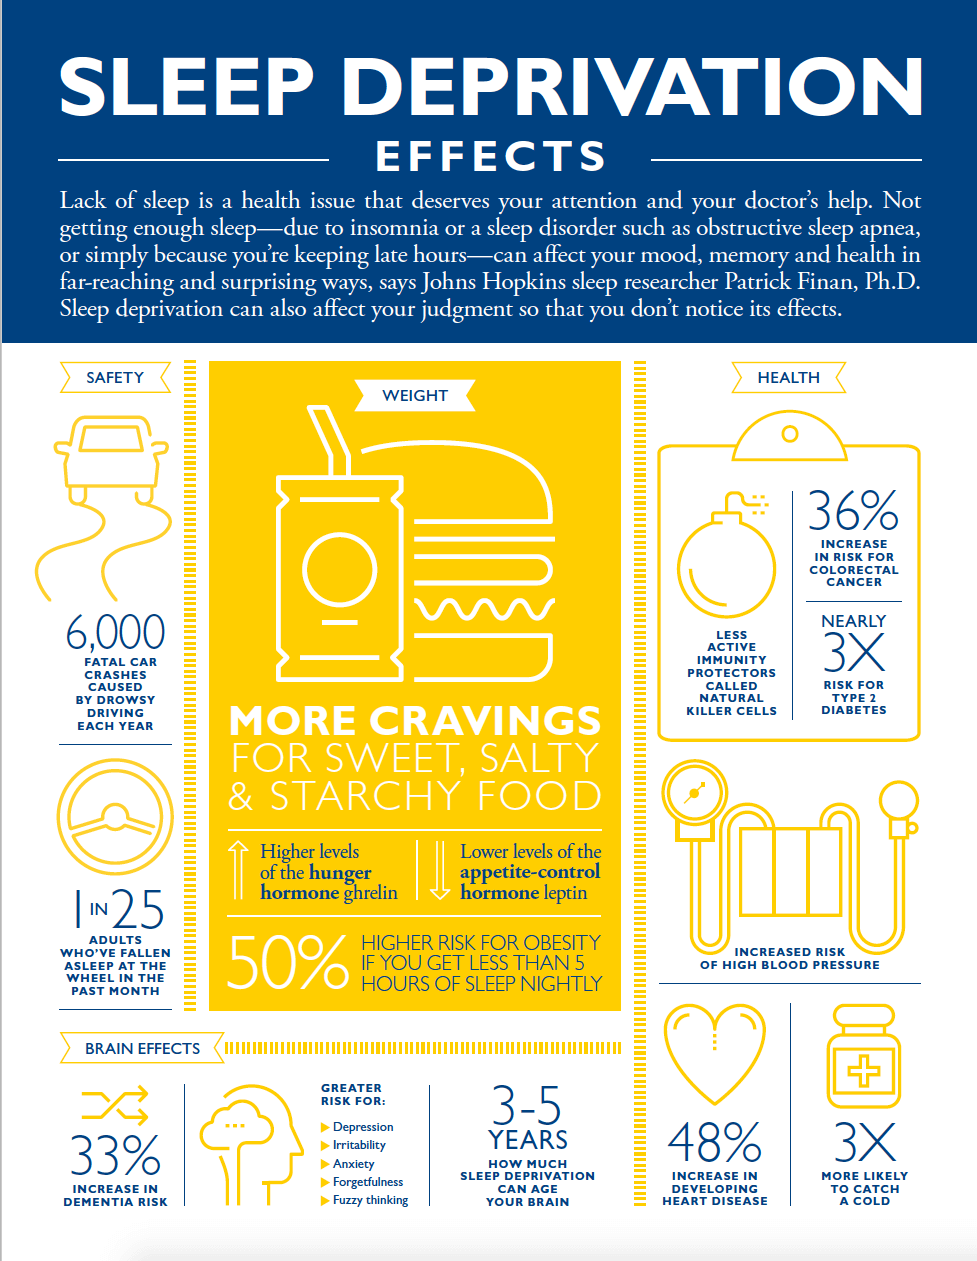 A blue and yellow infographic with images and text related to sleep deprevation